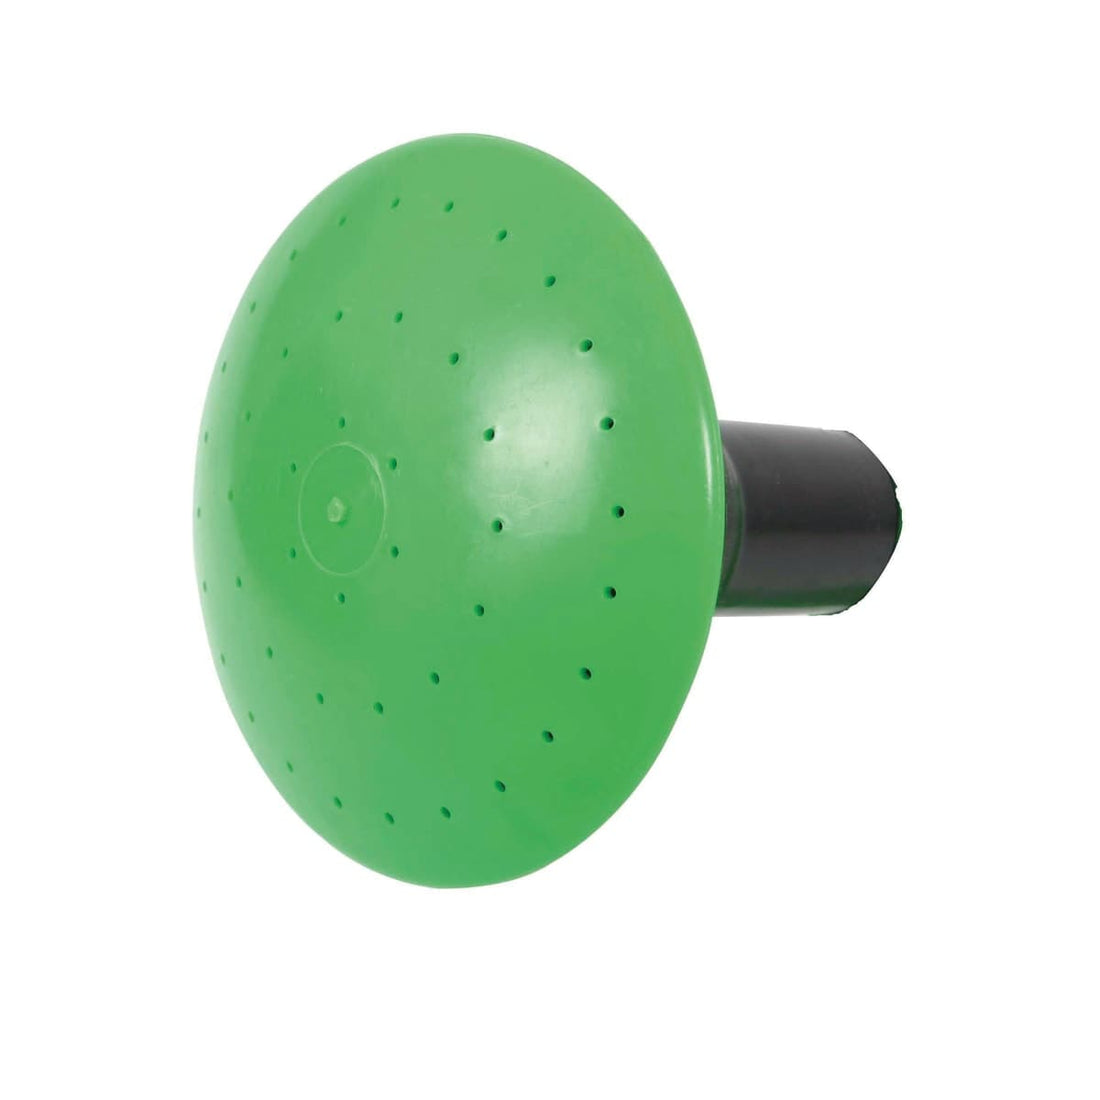 REPLACEMENT ROSETTE FOR WATERING CAN - best price from Maltashopper.com BR500007572